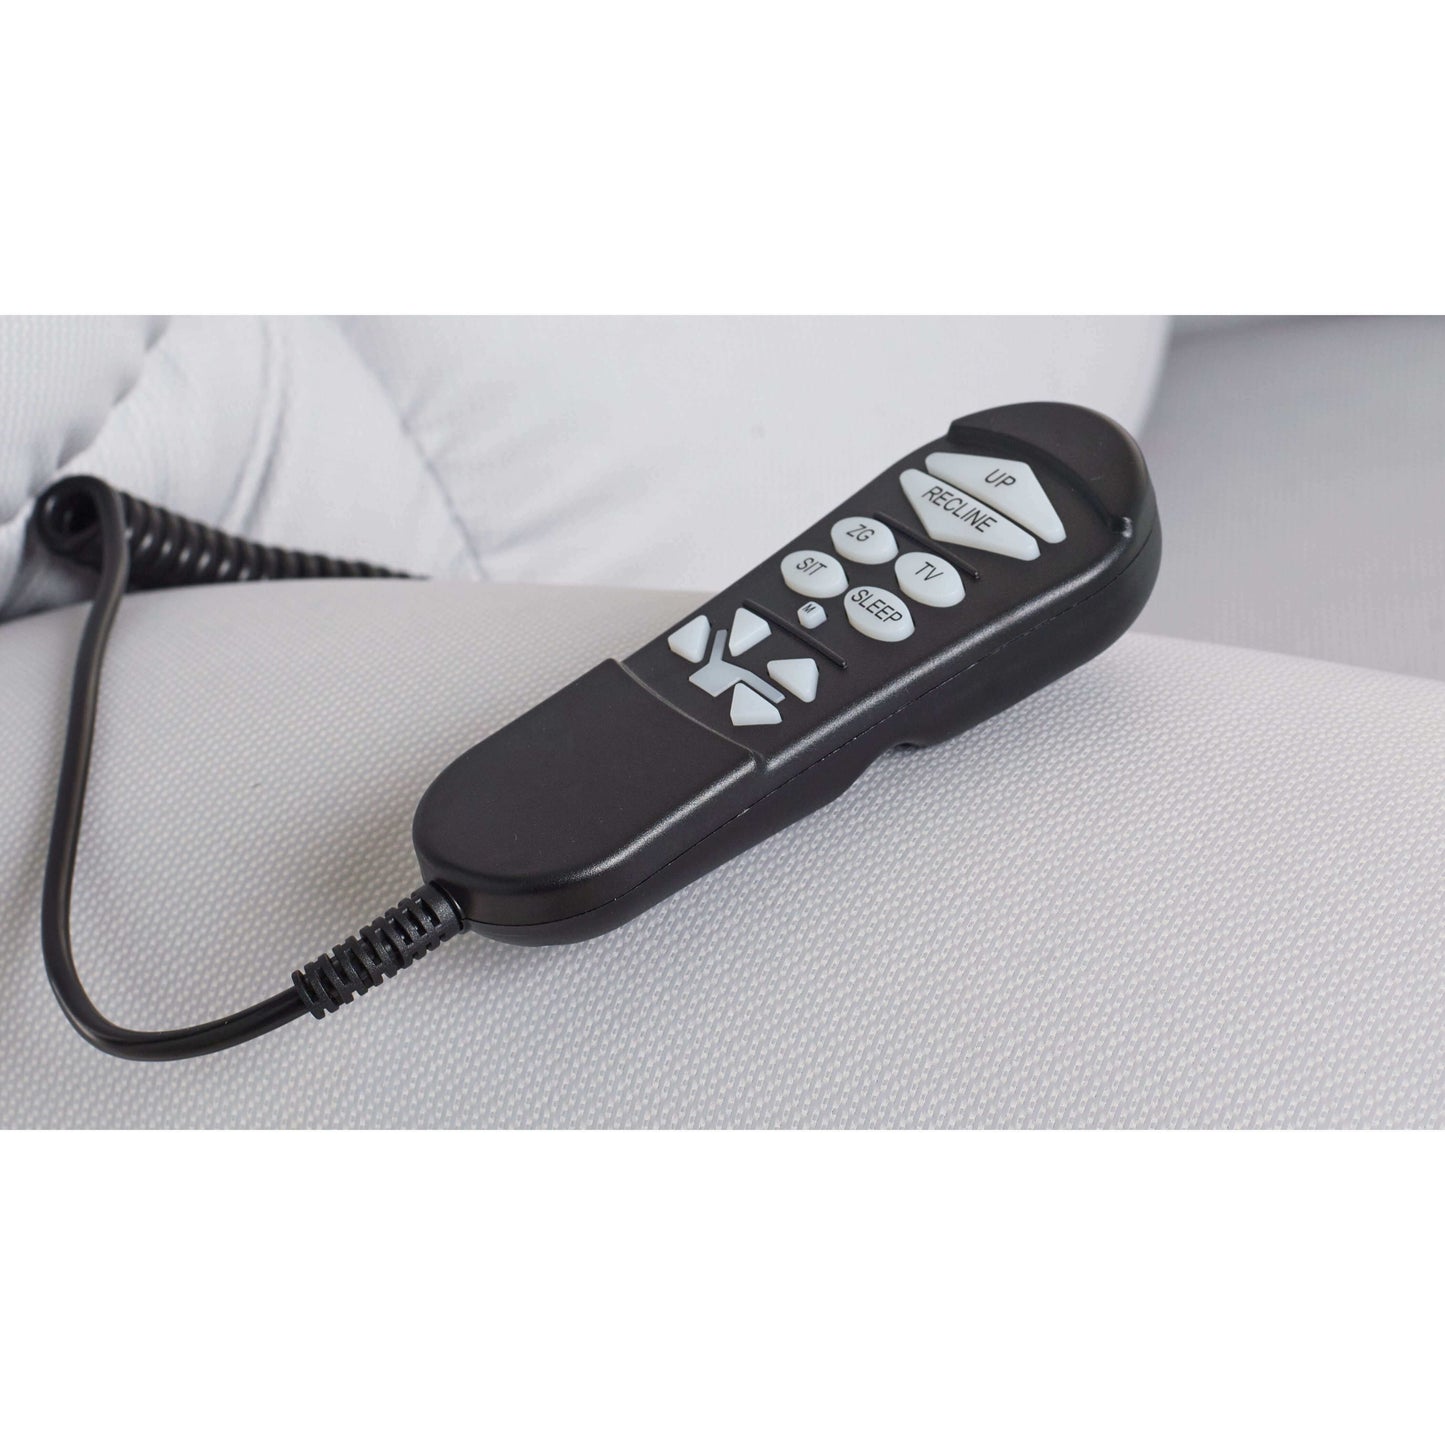 Perfect Sleep Chair remote with white buttons showing the different recline positions